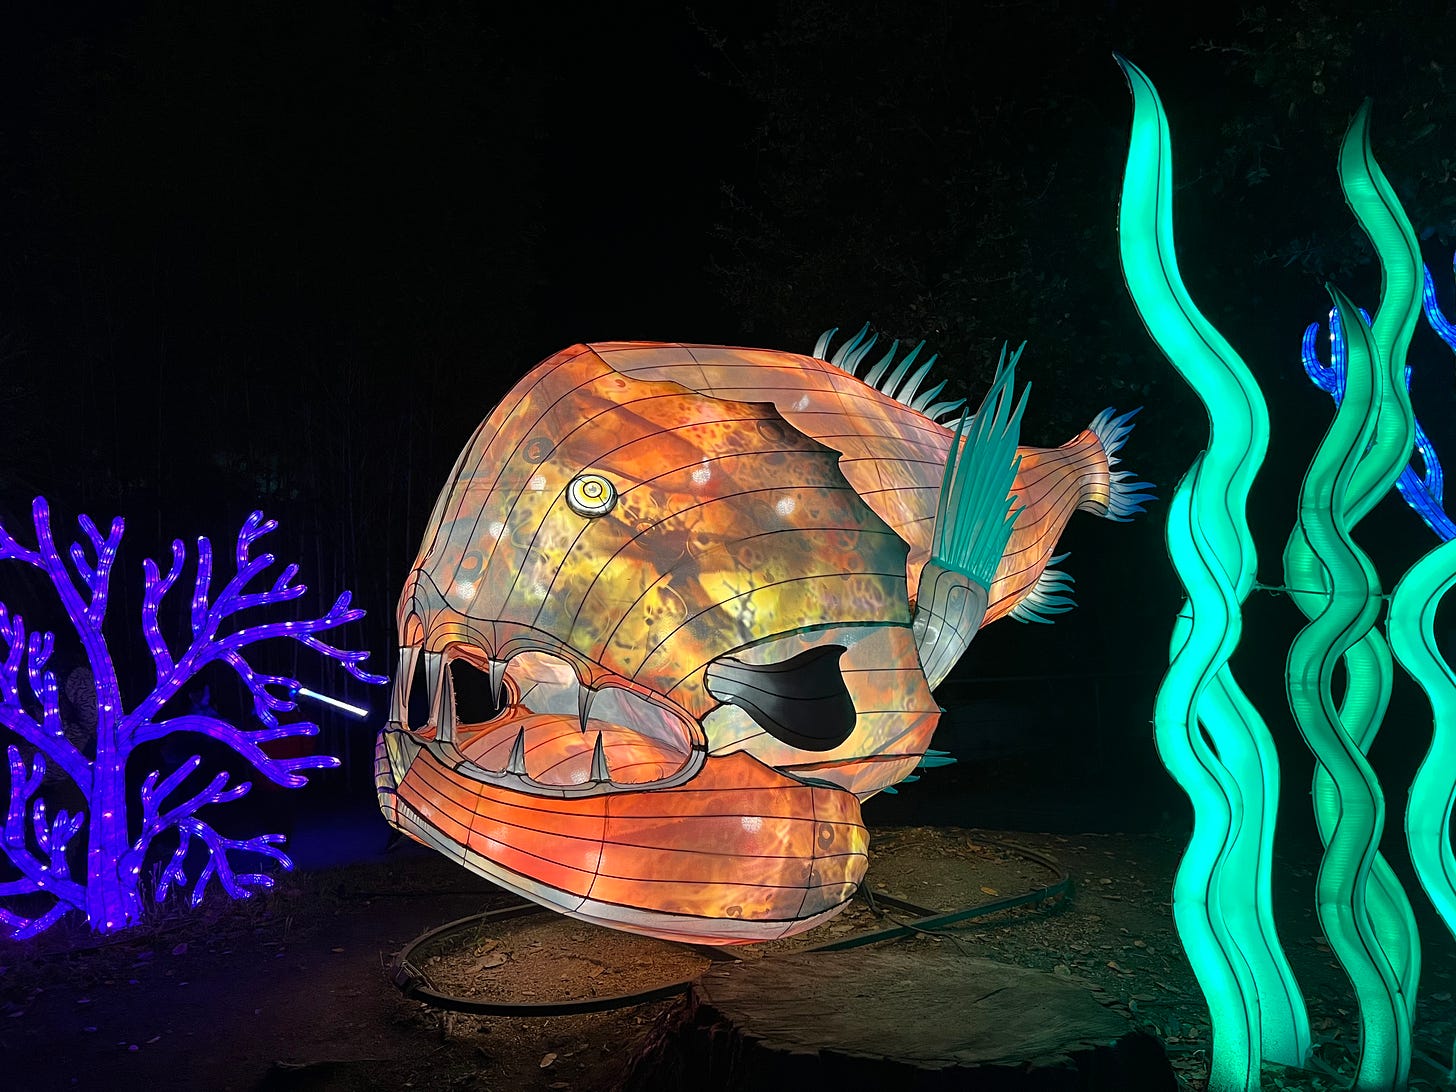 this glowing anglerfish, or something similar, was at least 8 feet tall